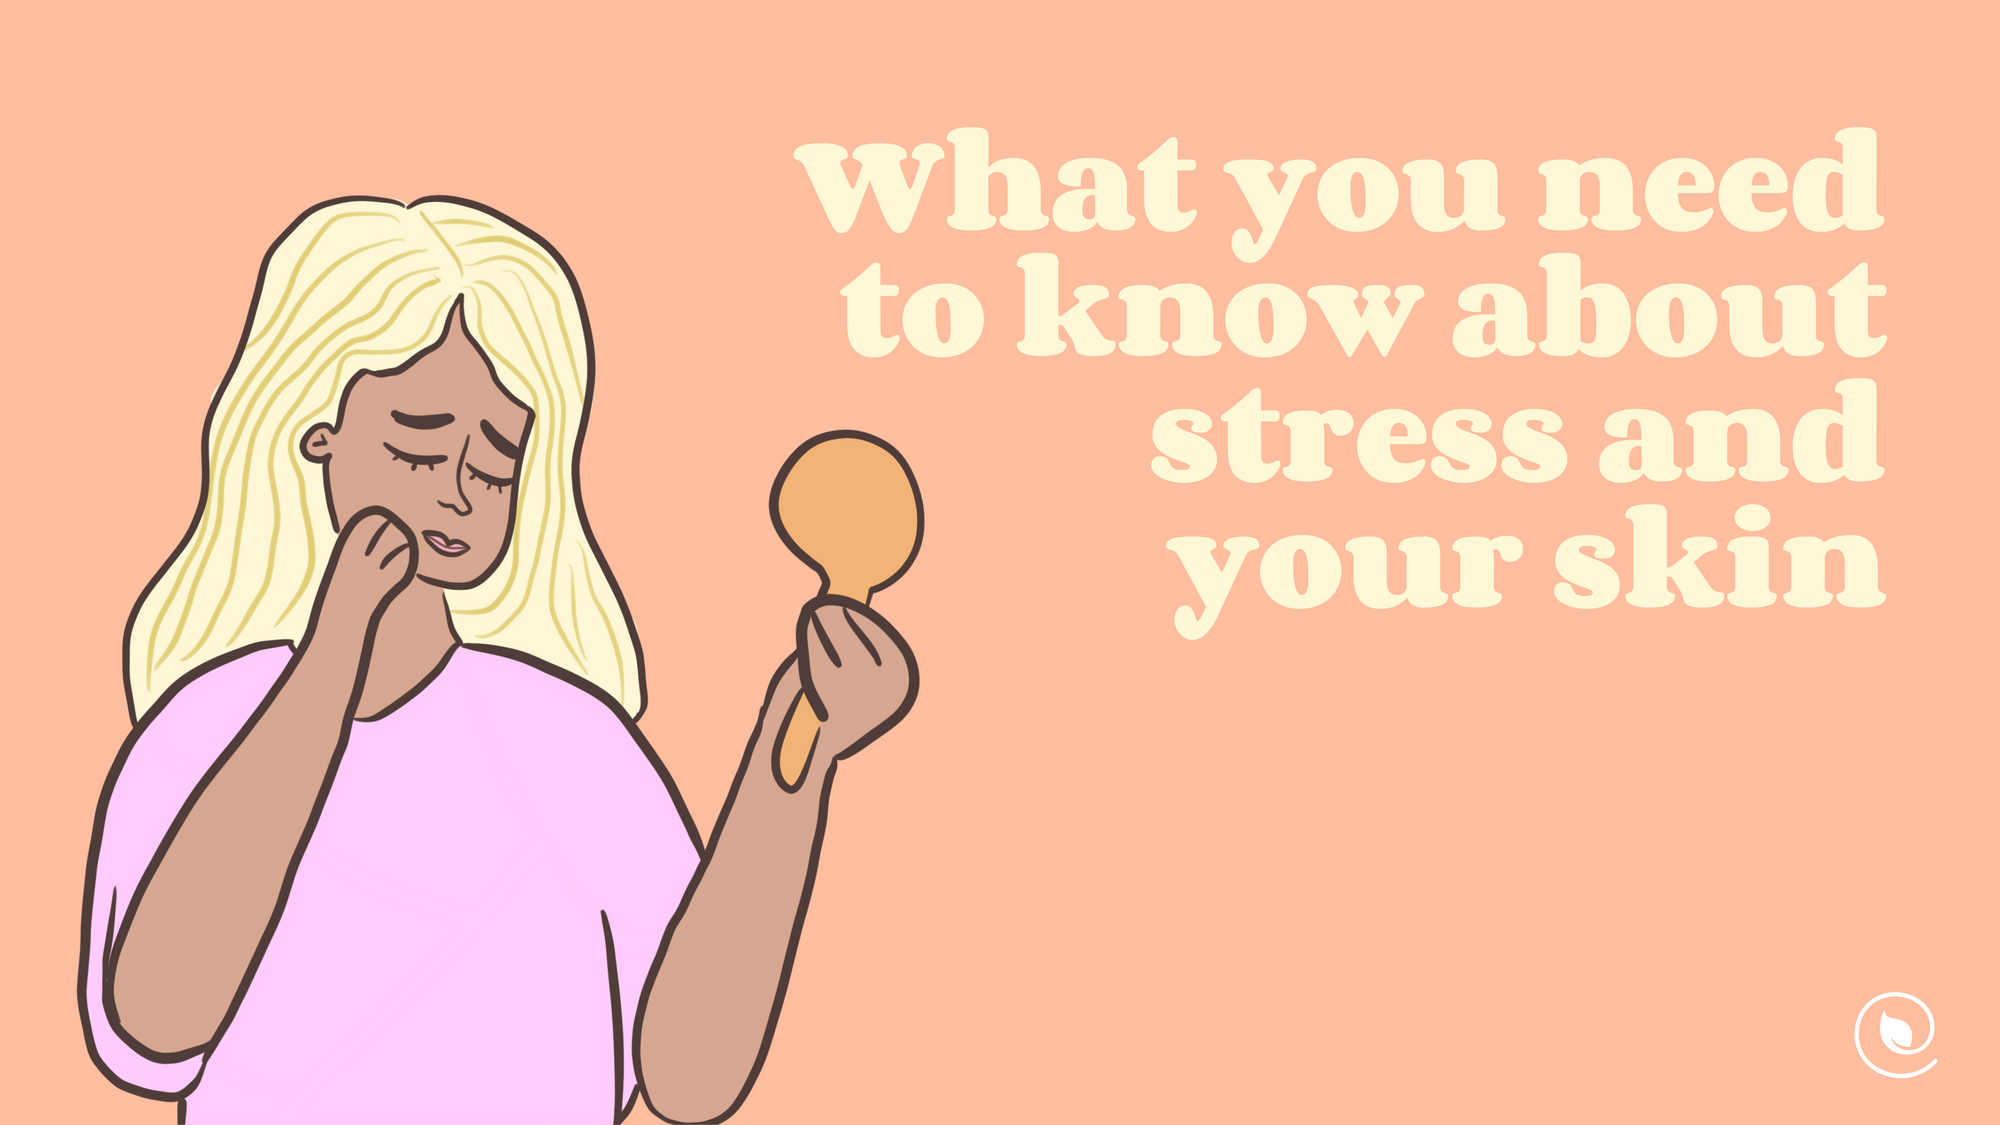 What You Need to Know about Stress and Your Skin